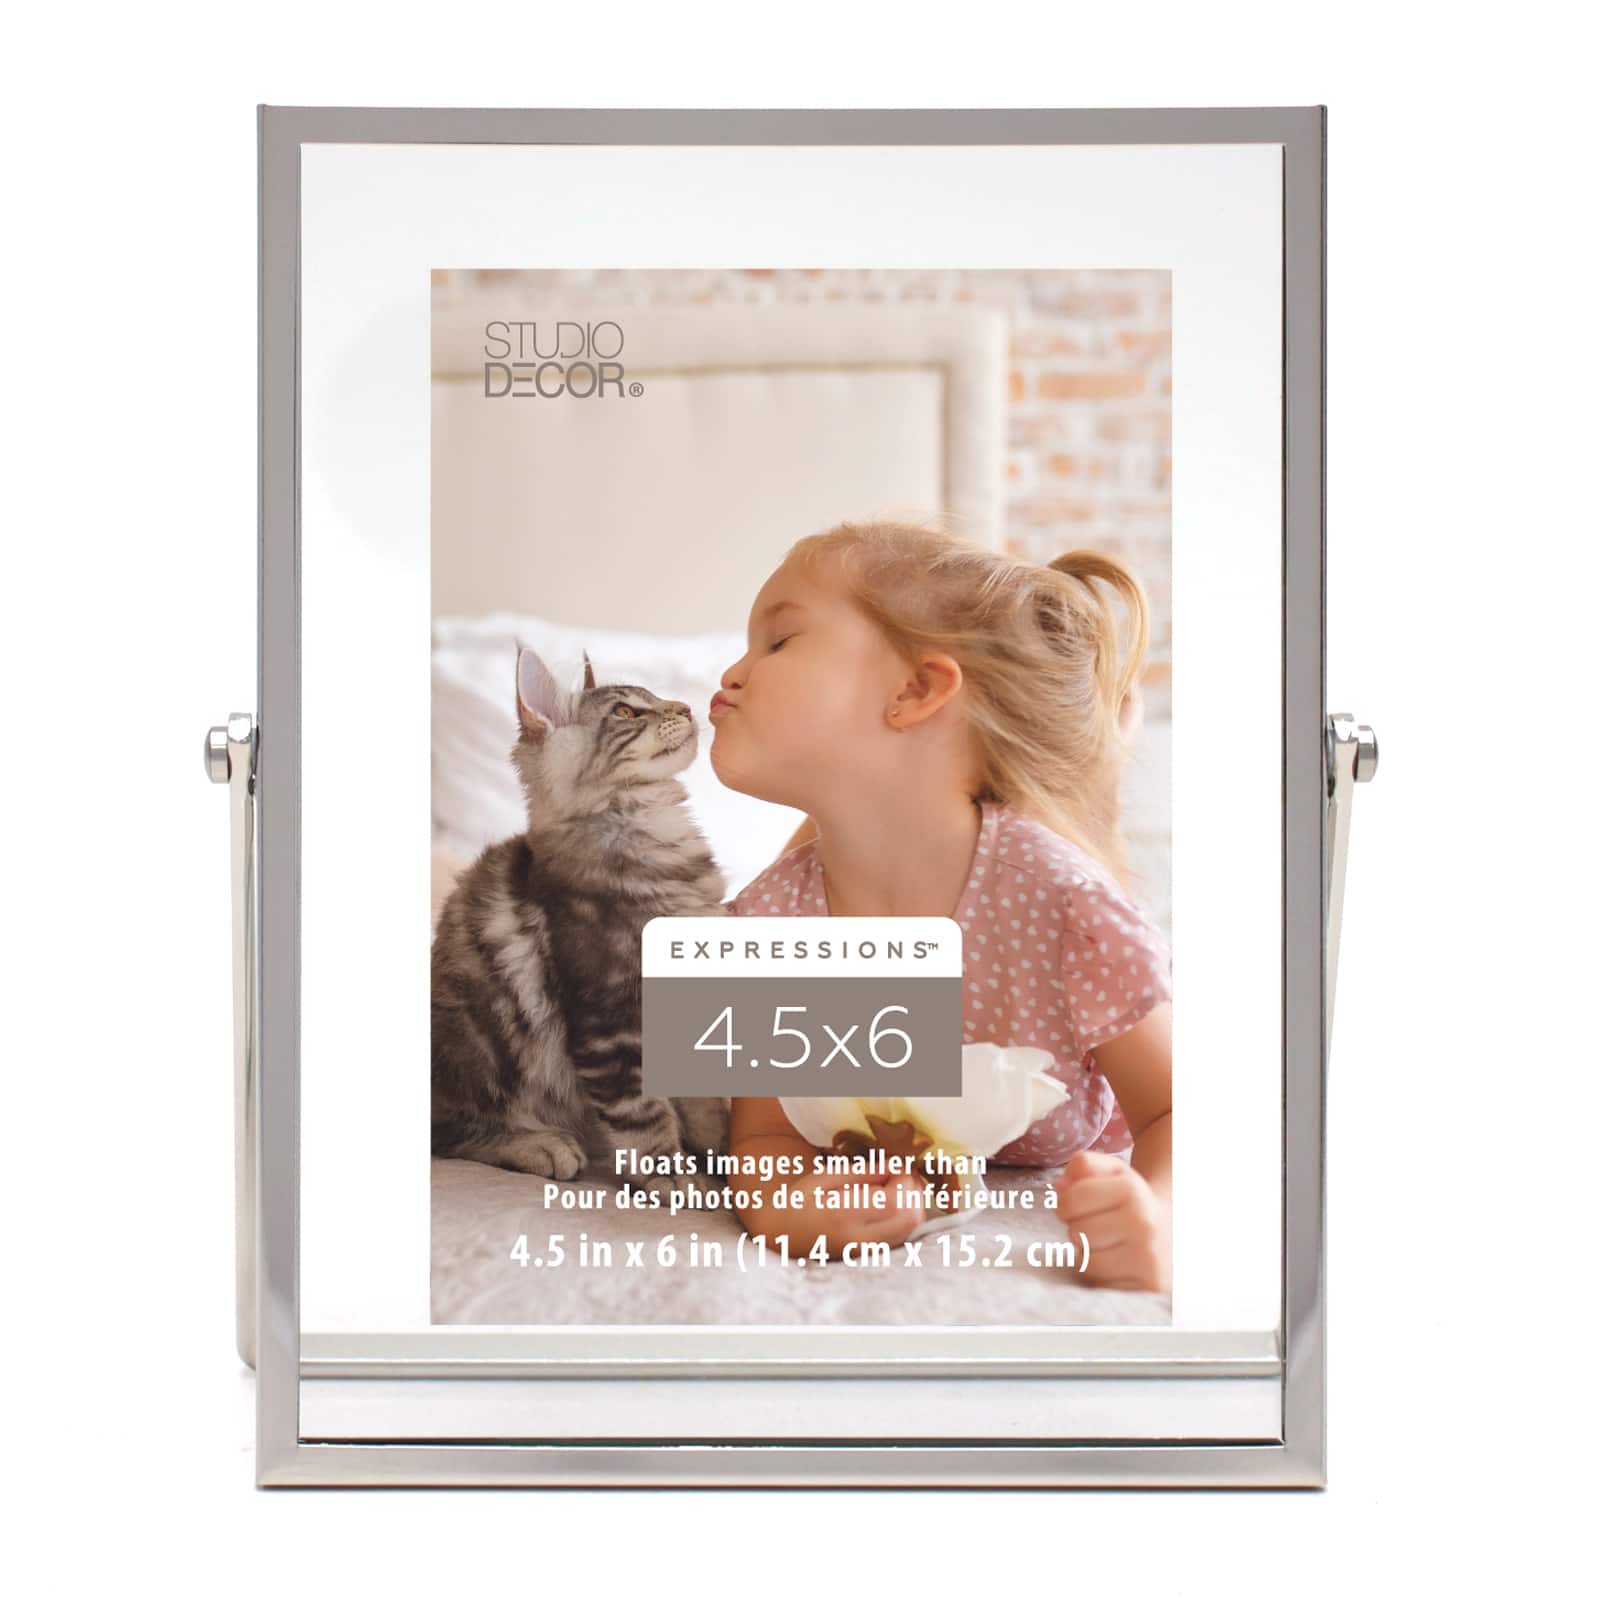 Silver 4.5 x 6 Float Frame, Expressions™ by Studio Décor®